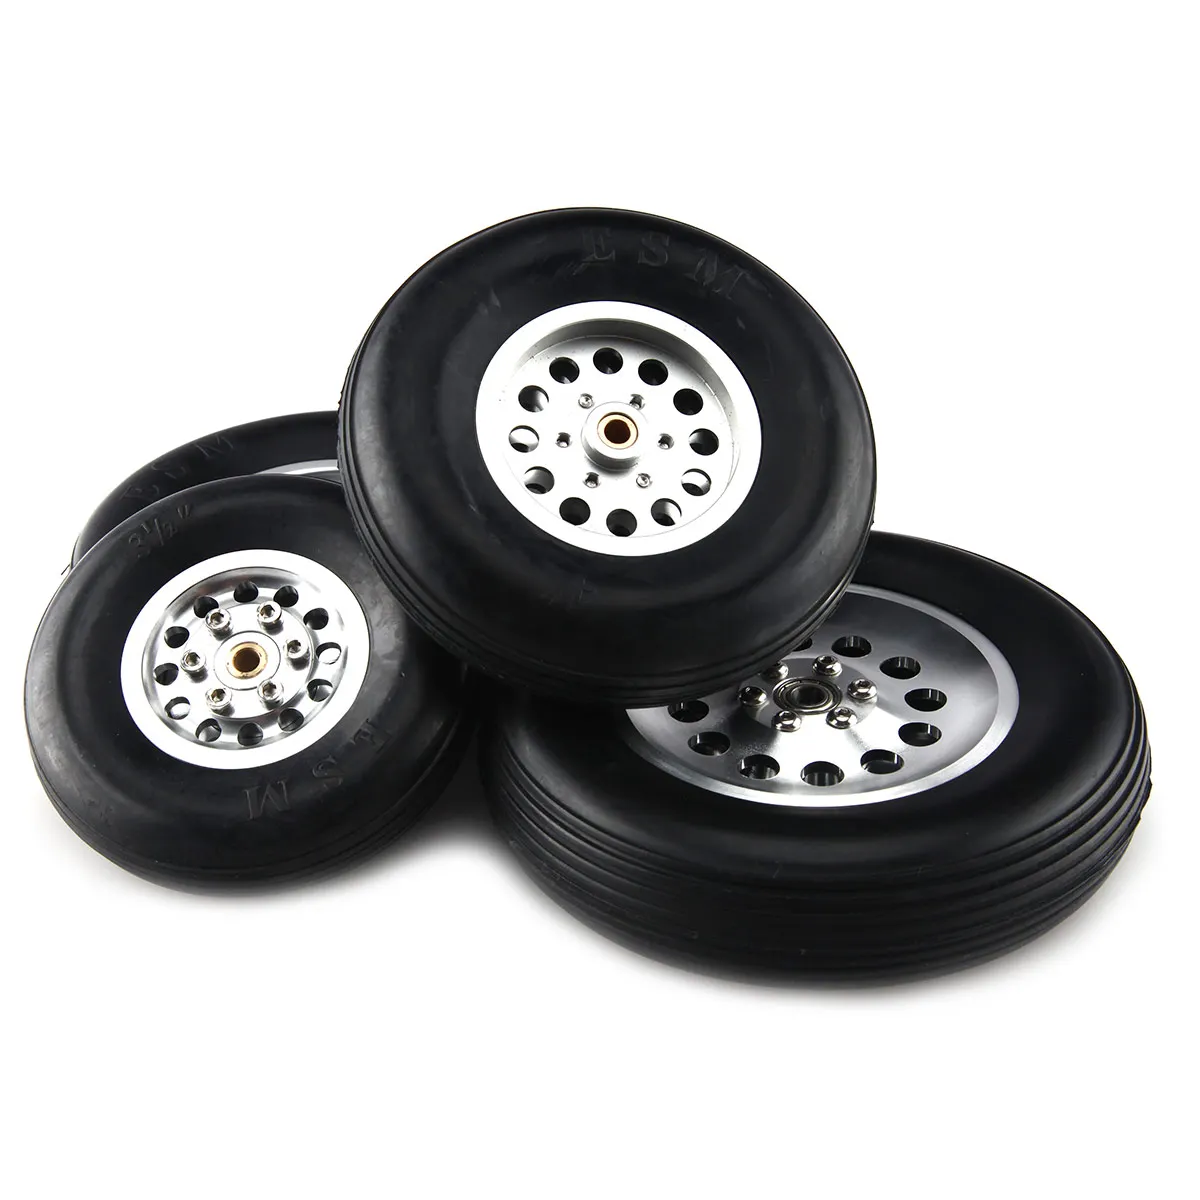 3.5/" Rubber PU Wheel with Plastic Hub for RC Airplane Replacement Parts QP 1/"